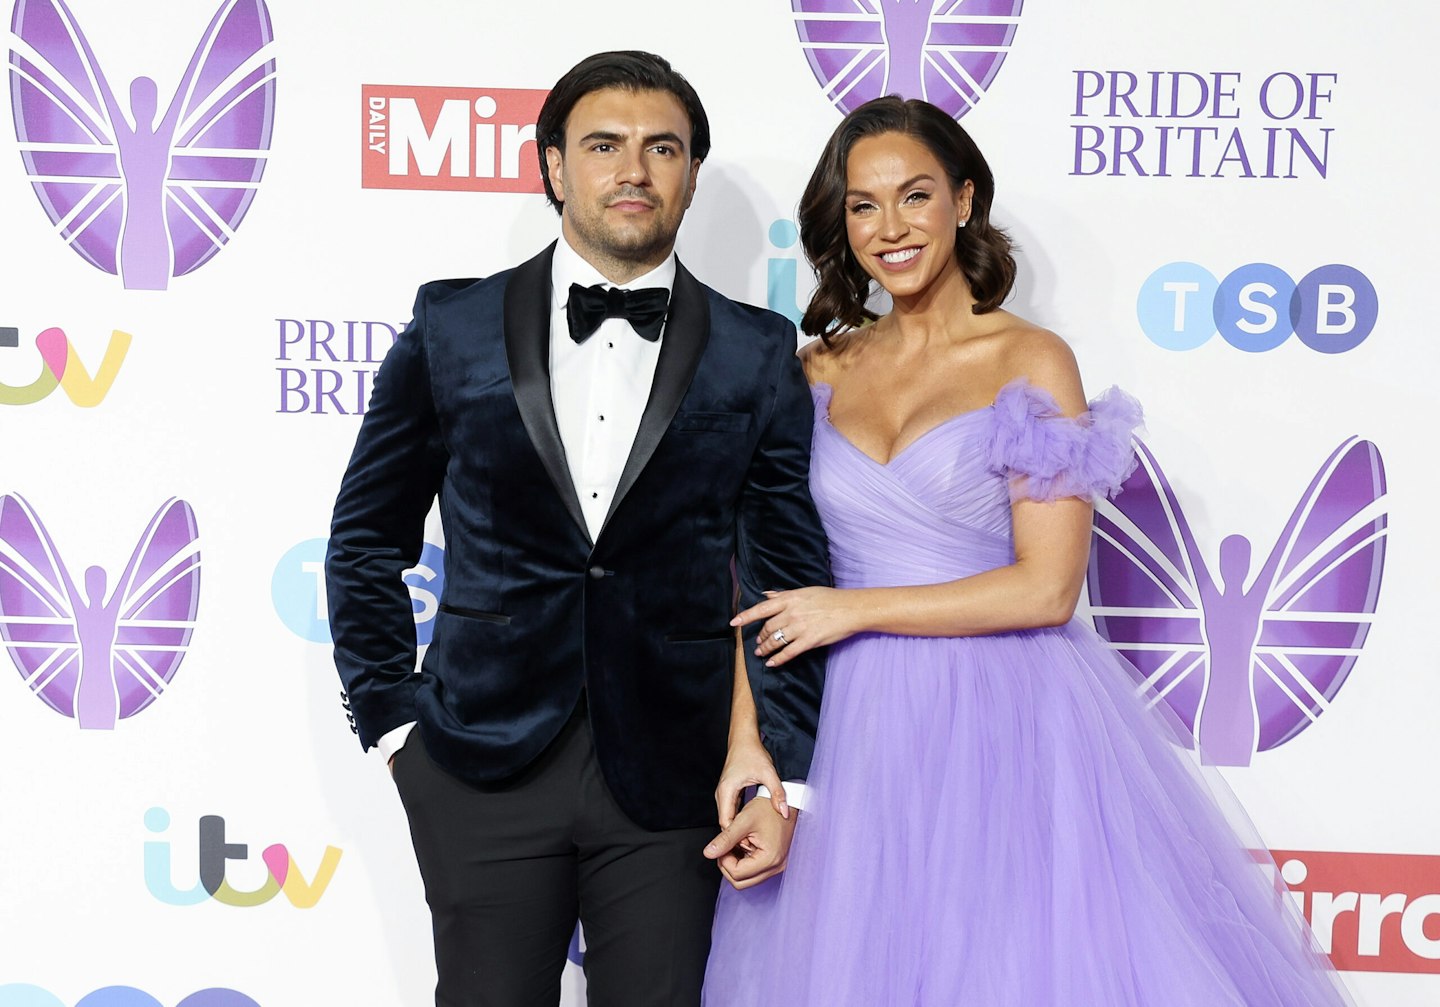 Ercan Ramadan and Vicky Pattison